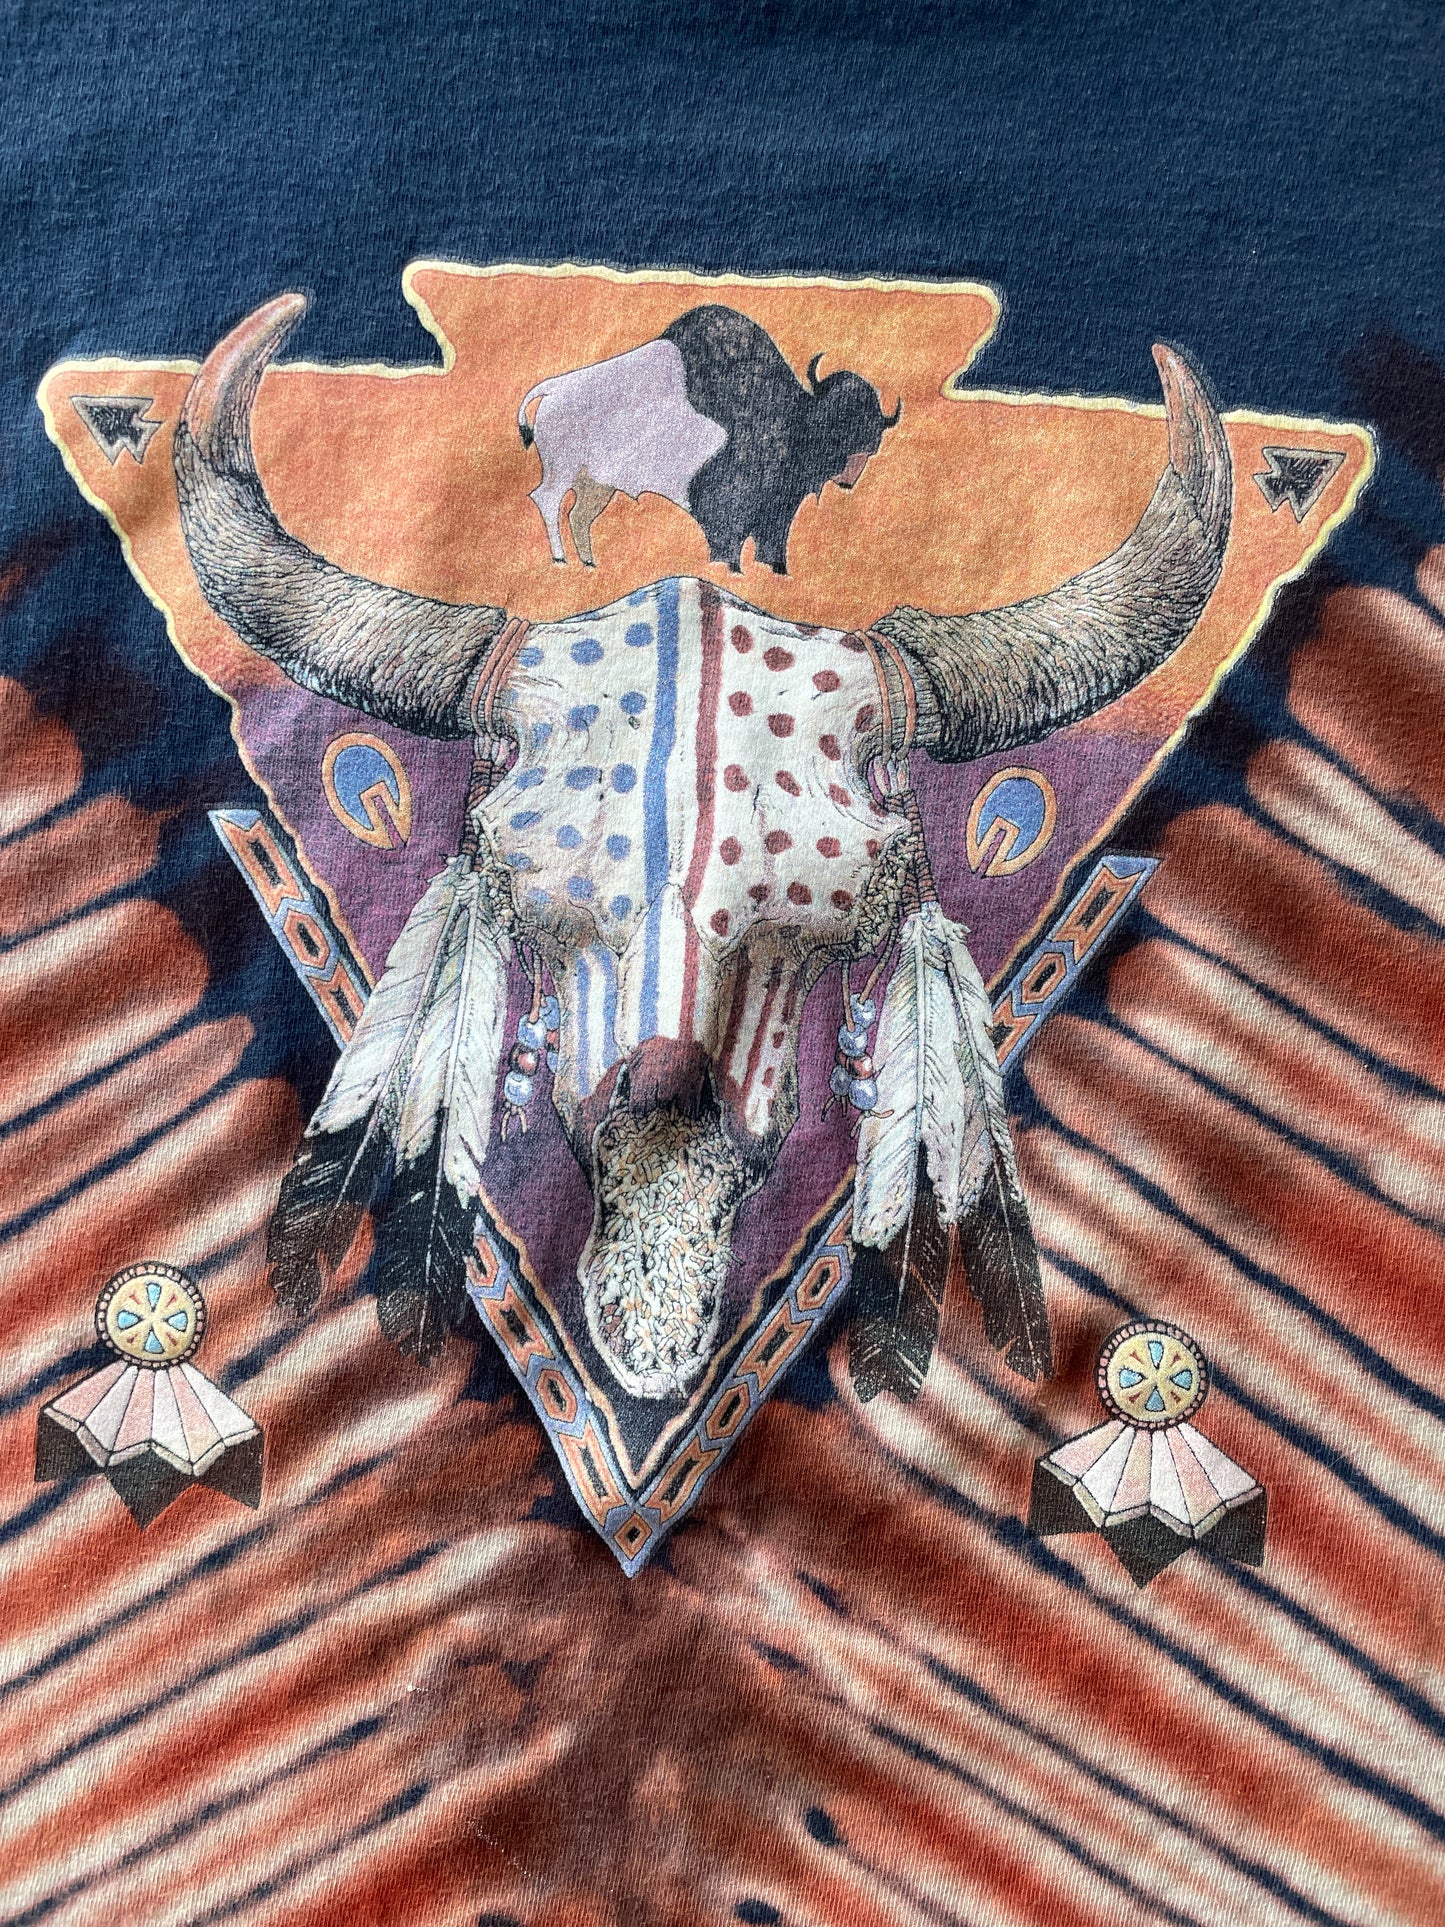 MEDIUM Men’s Vintage Levi's Western Cow Skull Handmade Reverse Tie Dye Short Sleeve T-Shirt | One-Of-a-Kind Upcycled Navy Blue, Brown, and Yellow Desert Tones Tie Dye Top